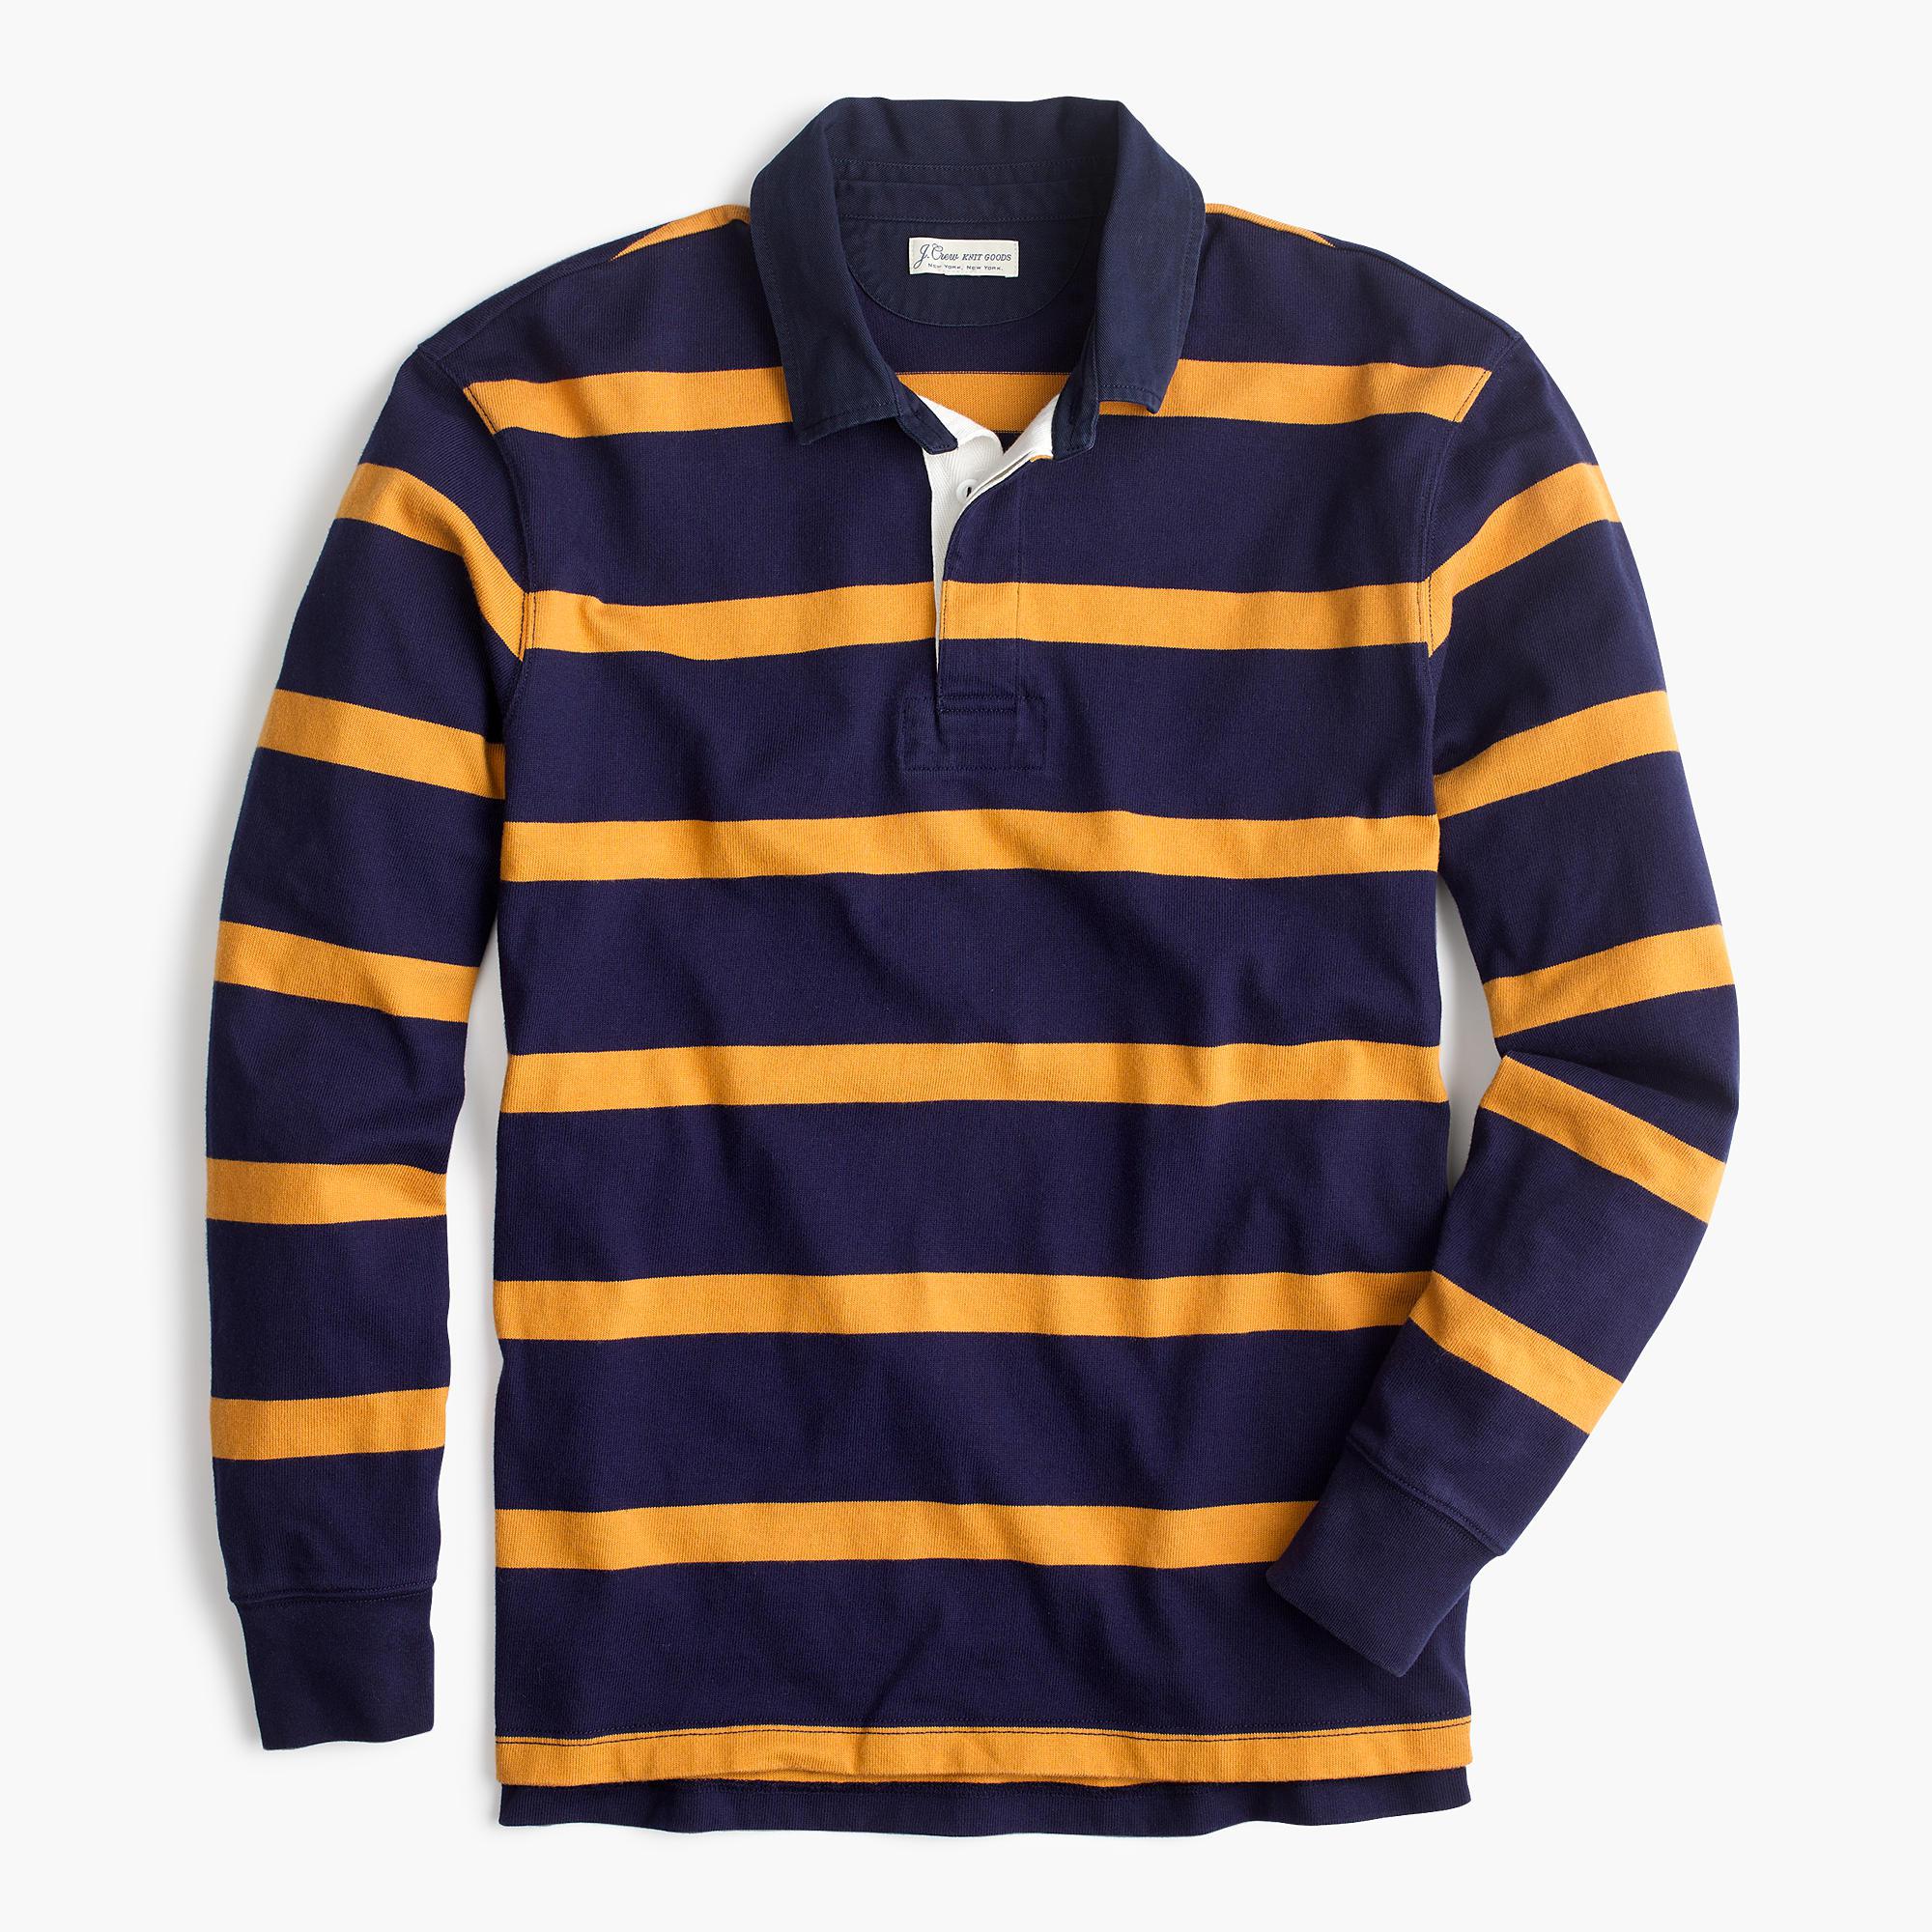 J.Crew Cotton Rugby Shirt In Thin Stripe in Blue for Men - Lyst